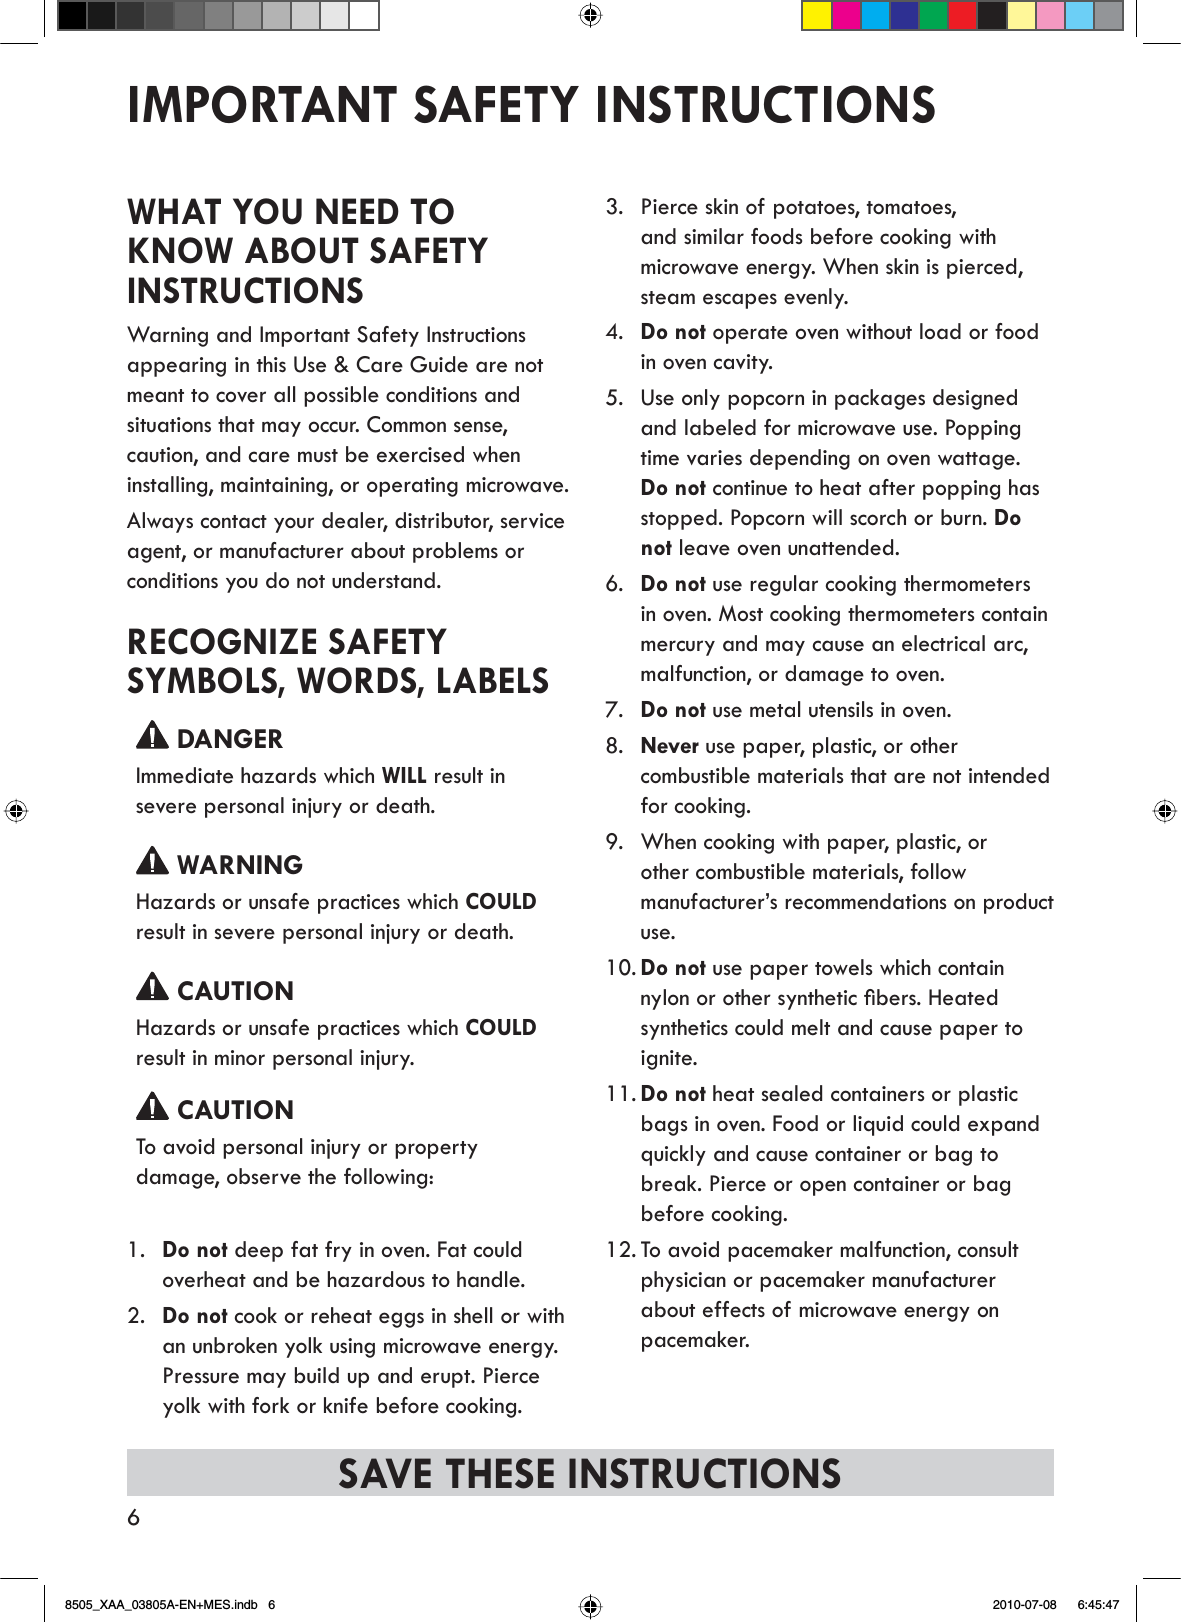 6IMPORTANT SAFETY INSTRUCTIONSSAVE THESE INSTRUCTIONSWHAT YOU NEED TO KNOW ABOUT SAFETY INSTRUCTIONSWarning and Important Safety Instructions appearing in this Use &amp; Care Guide are not meant to cover all possible conditions and situations that may occur. Common sense, caution, and care must be exercised when installing, maintaining, or operating microwave.Always contact your dealer, distributor, service agent, or manufacturer about problems or conditions you do not understand.RECOGNIZE SAFETY SYMBOLS, WORDS, LABELS DANGERImmediate hazards which WILL result in severe personal injury or death. WARNINGHazards or unsafe practices which COULDresult in severe personal injury or death. CAUTIONHazards or unsafe practices which COULDresult in minor personal injury. CAUTIONTo avoid personal injury or property damage, observe the following:1. Do not deep fat fry in oven. Fat could overheat and be hazardous to handle.2. Do not cook or reheat eggs in shell or with an unbroken yolk using microwave energy.Pressure may build up and erupt. Pierce yolk with fork or knife before cooking.3. Pierce skin of potatoes, tomatoes, and similar foods before cooking with microwave energy. When skin is pierced, steam escapes evenly.4. Do not operate oven without load or food in oven cavity.5. Use only popcorn in packages designed and labeled for microwave use. Popping time varies depending on oven wattage.Do not continue to heat after popping has stopped. Popcorn will scorch or burn. Donot leave oven unattended.6. Do not use regular cooking thermometers in oven. Most cooking thermometers contain mercury and may cause an electrical arc, malfunction, or damage to oven.7. Do not use metal utensils in oven.8. Never use paper, plastic, or other combustible materials that are not intended for cooking.9. When cooking with paper, plastic, or other combustible materials, follow manufacturer’s recommendations on product use.10. Do not use paper towels which contain Q\ORQRURWKHUV\QWKHWLFÀEHUV+HDWHGsynthetics could melt and cause paper to ignite.11. Do not heat sealed containers or plastic bags in oven. Food or liquid could expand quickly and cause container or bag to break. Pierce or open container or bag before cooking.12. To avoid pacemaker malfunction, consult physician or pacemaker manufacturer about effects of microwave energy on pacemaker.8505_XAA_03805A-EN+MES.indb   6 2010-07-08     6:45:47